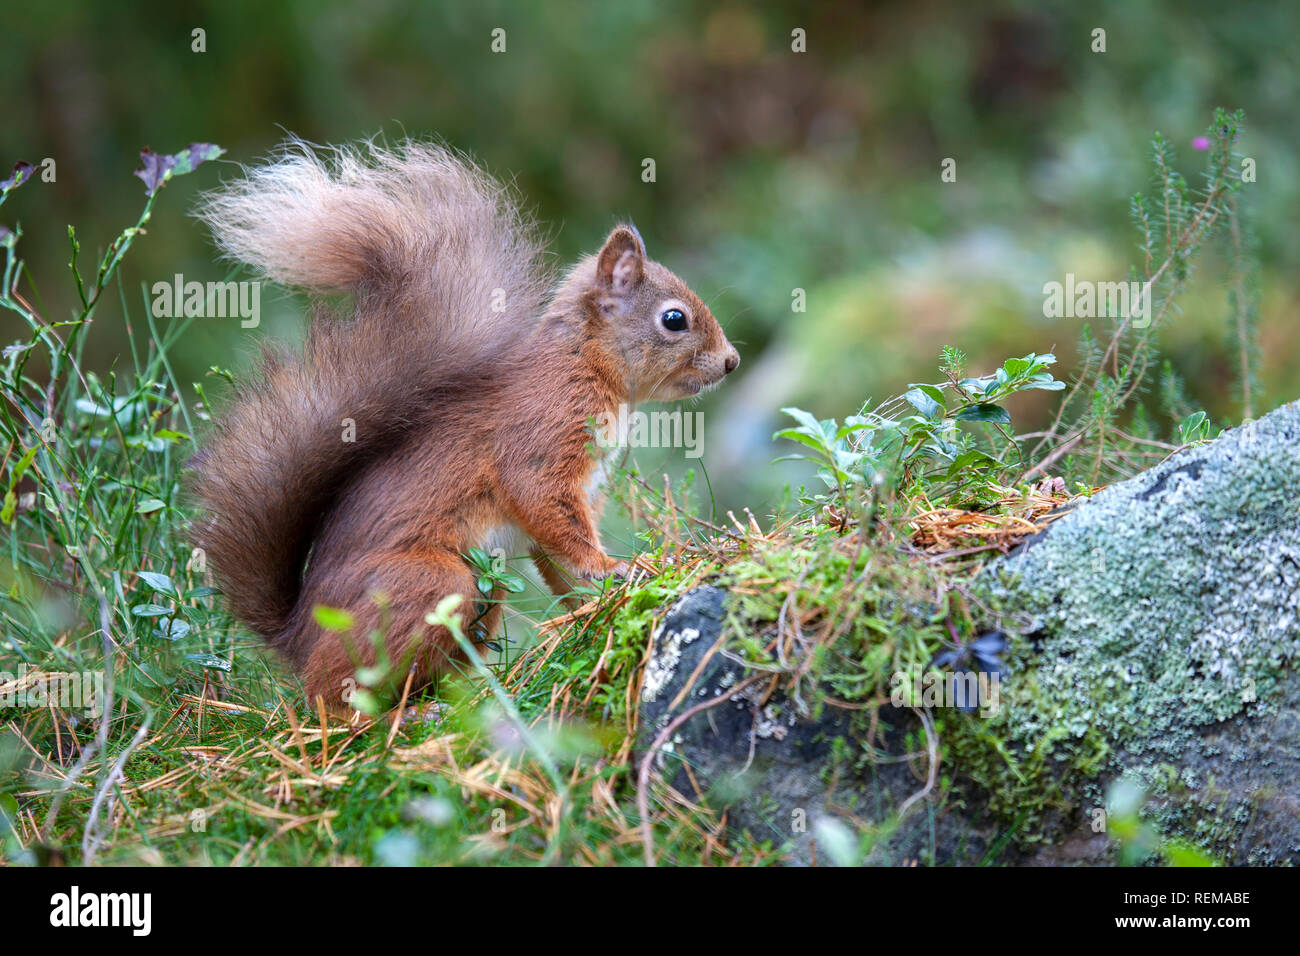 Bushy tailed red squirrel close up Sciurus vulgaris in profile  on the ground among mosses and forest plants Stock Photo